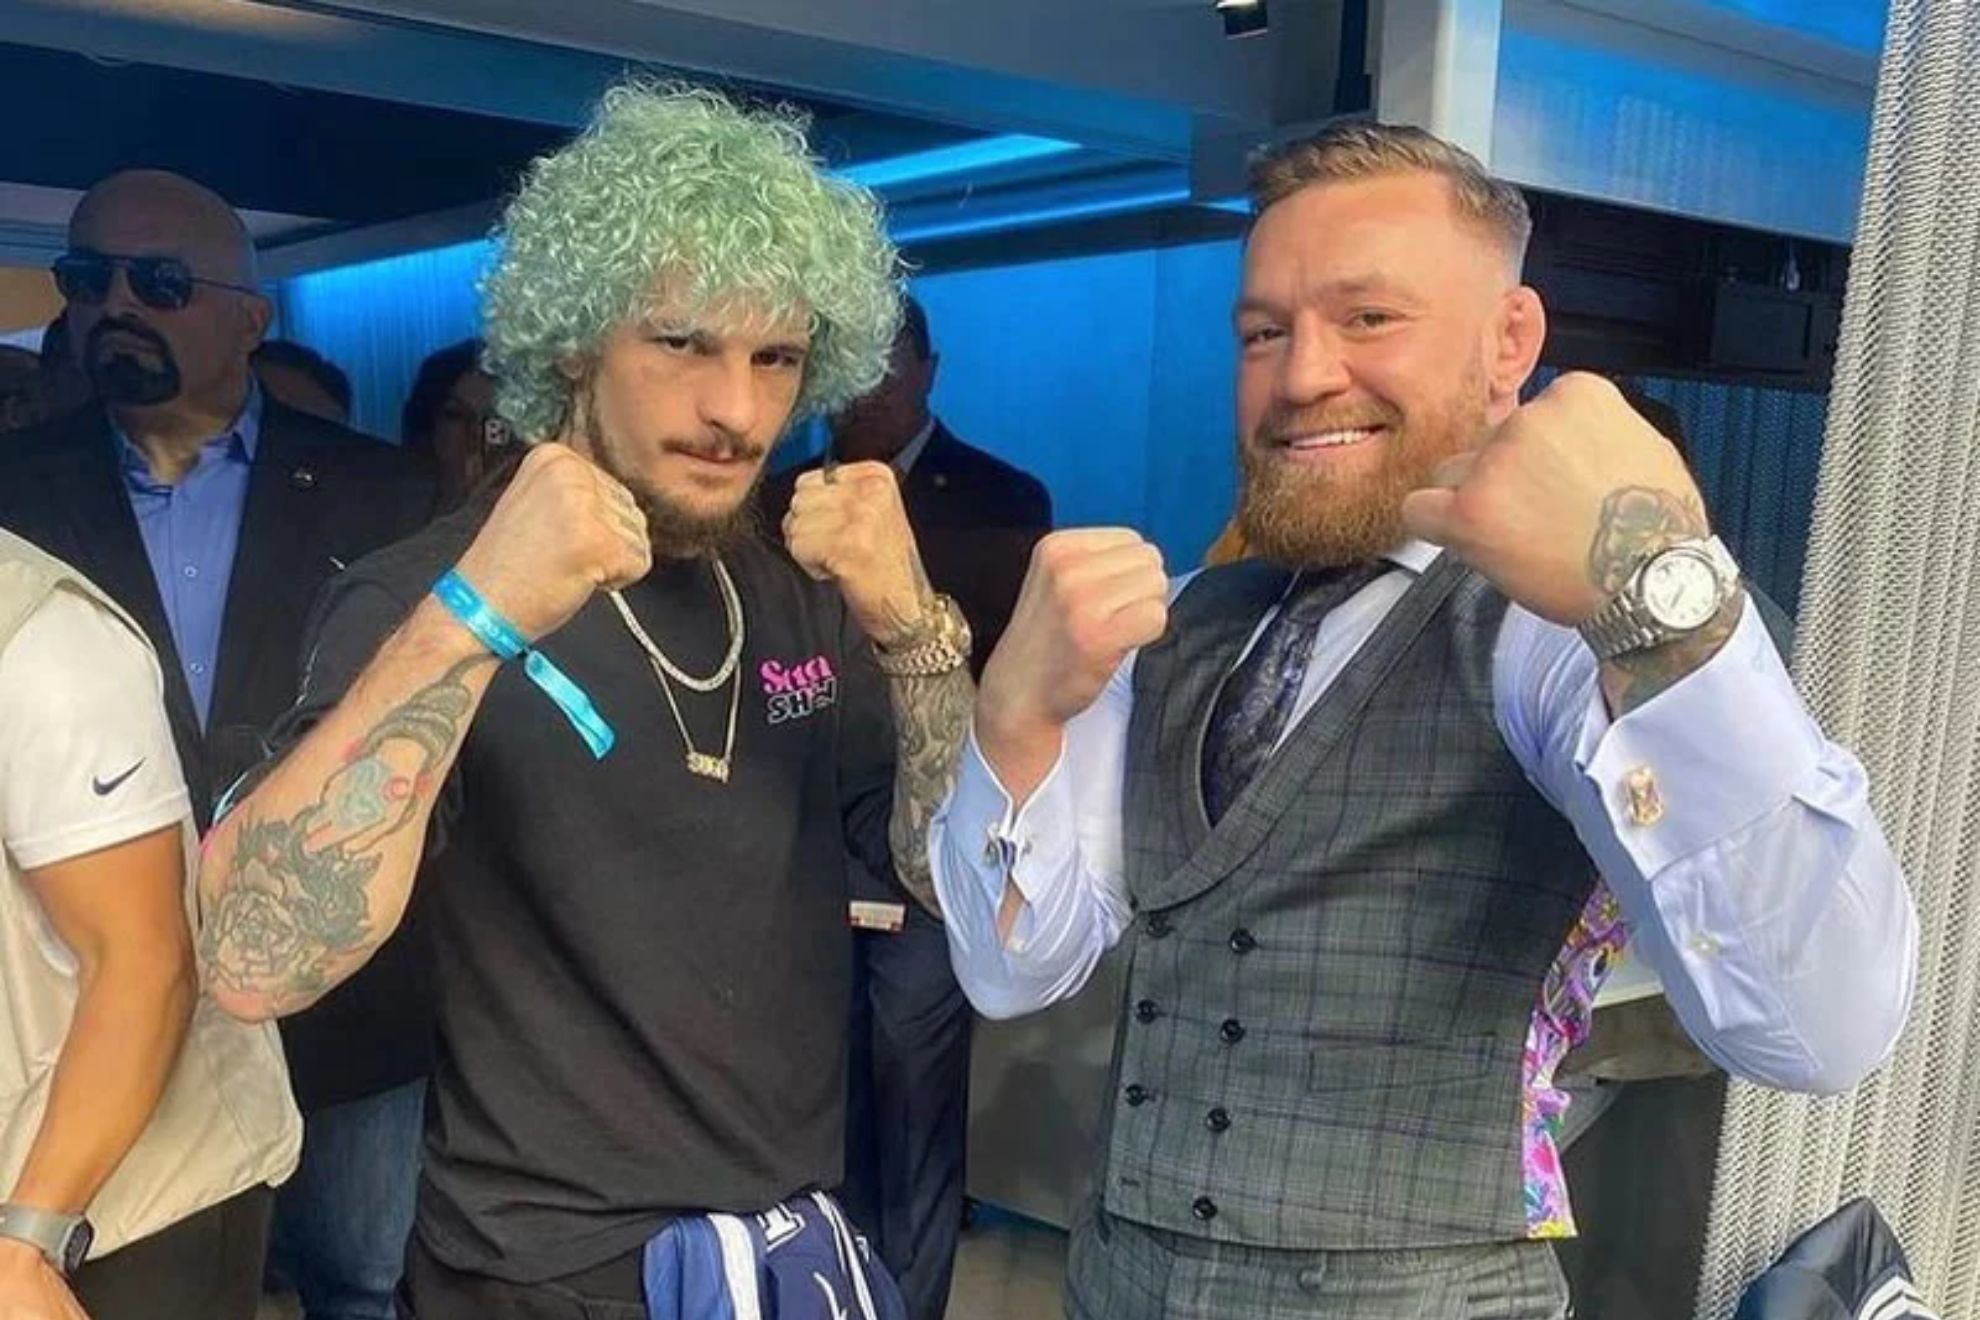 Sean OMalley (left) poses next to his idol Conor McGregor. The UFC fighter has been touted as the new potential Conor by UFC President Dana White.